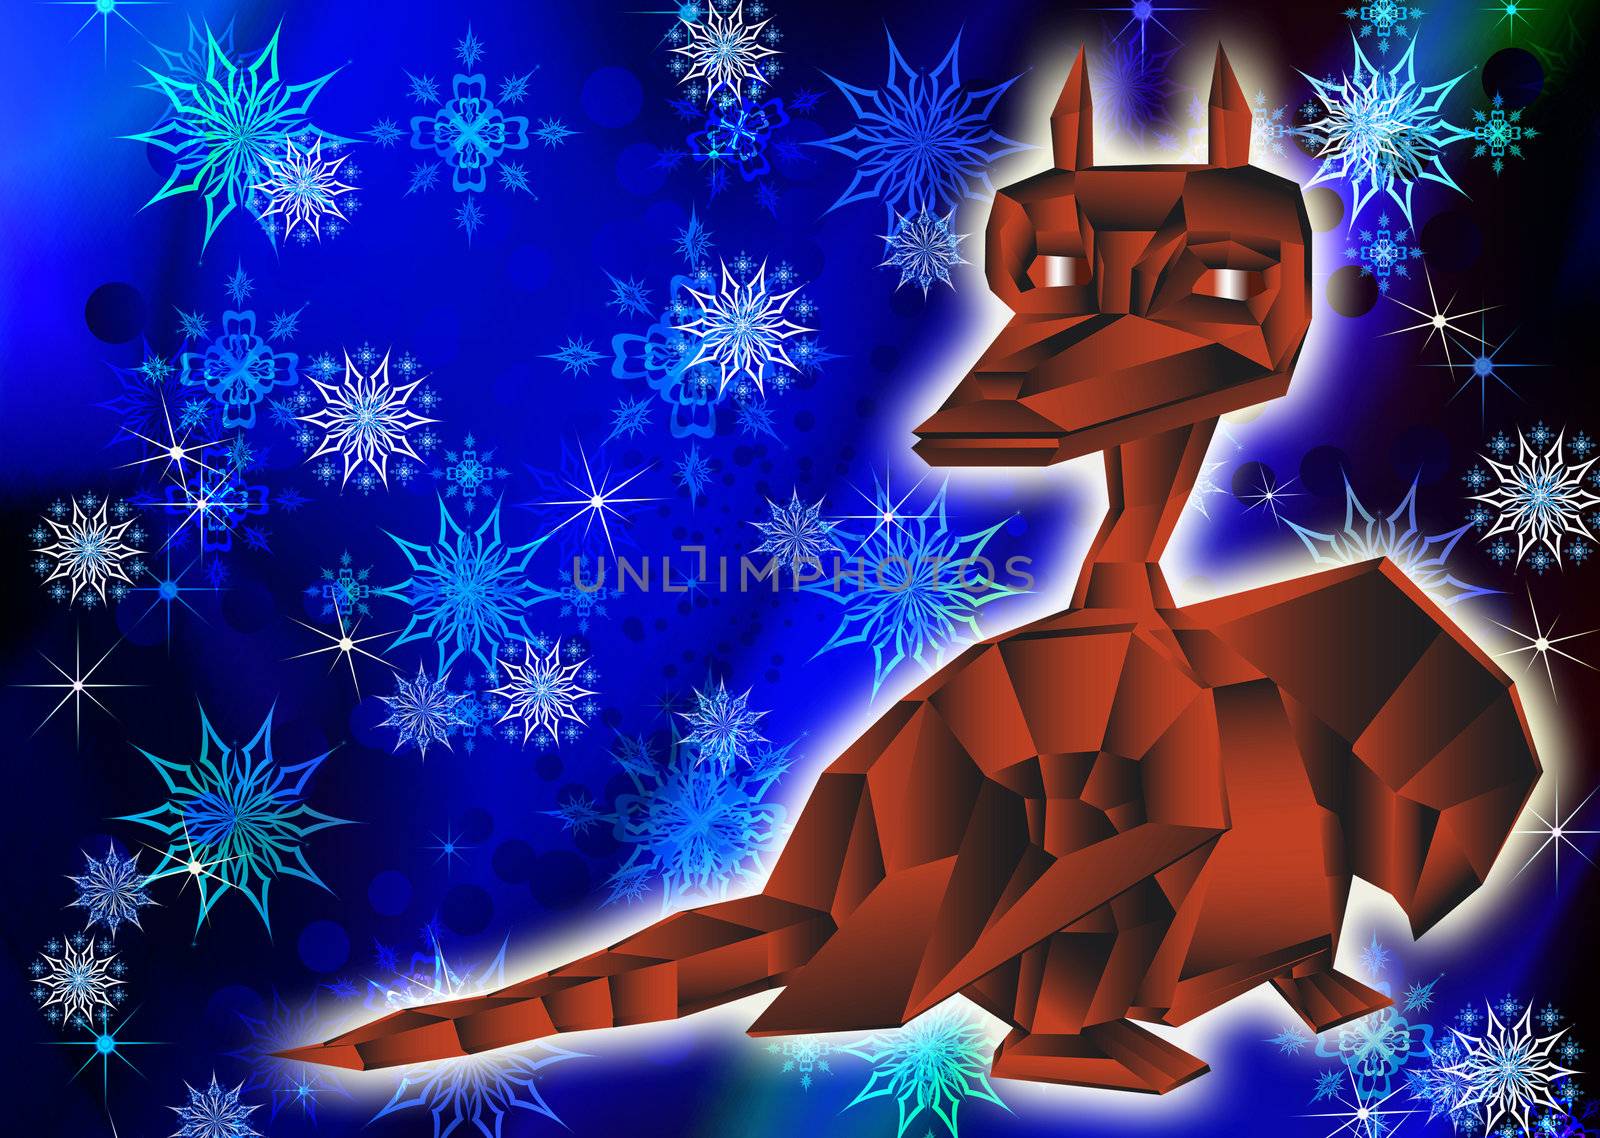 Fantastic dragon-symbol 2012 New Years on an abstract winter background